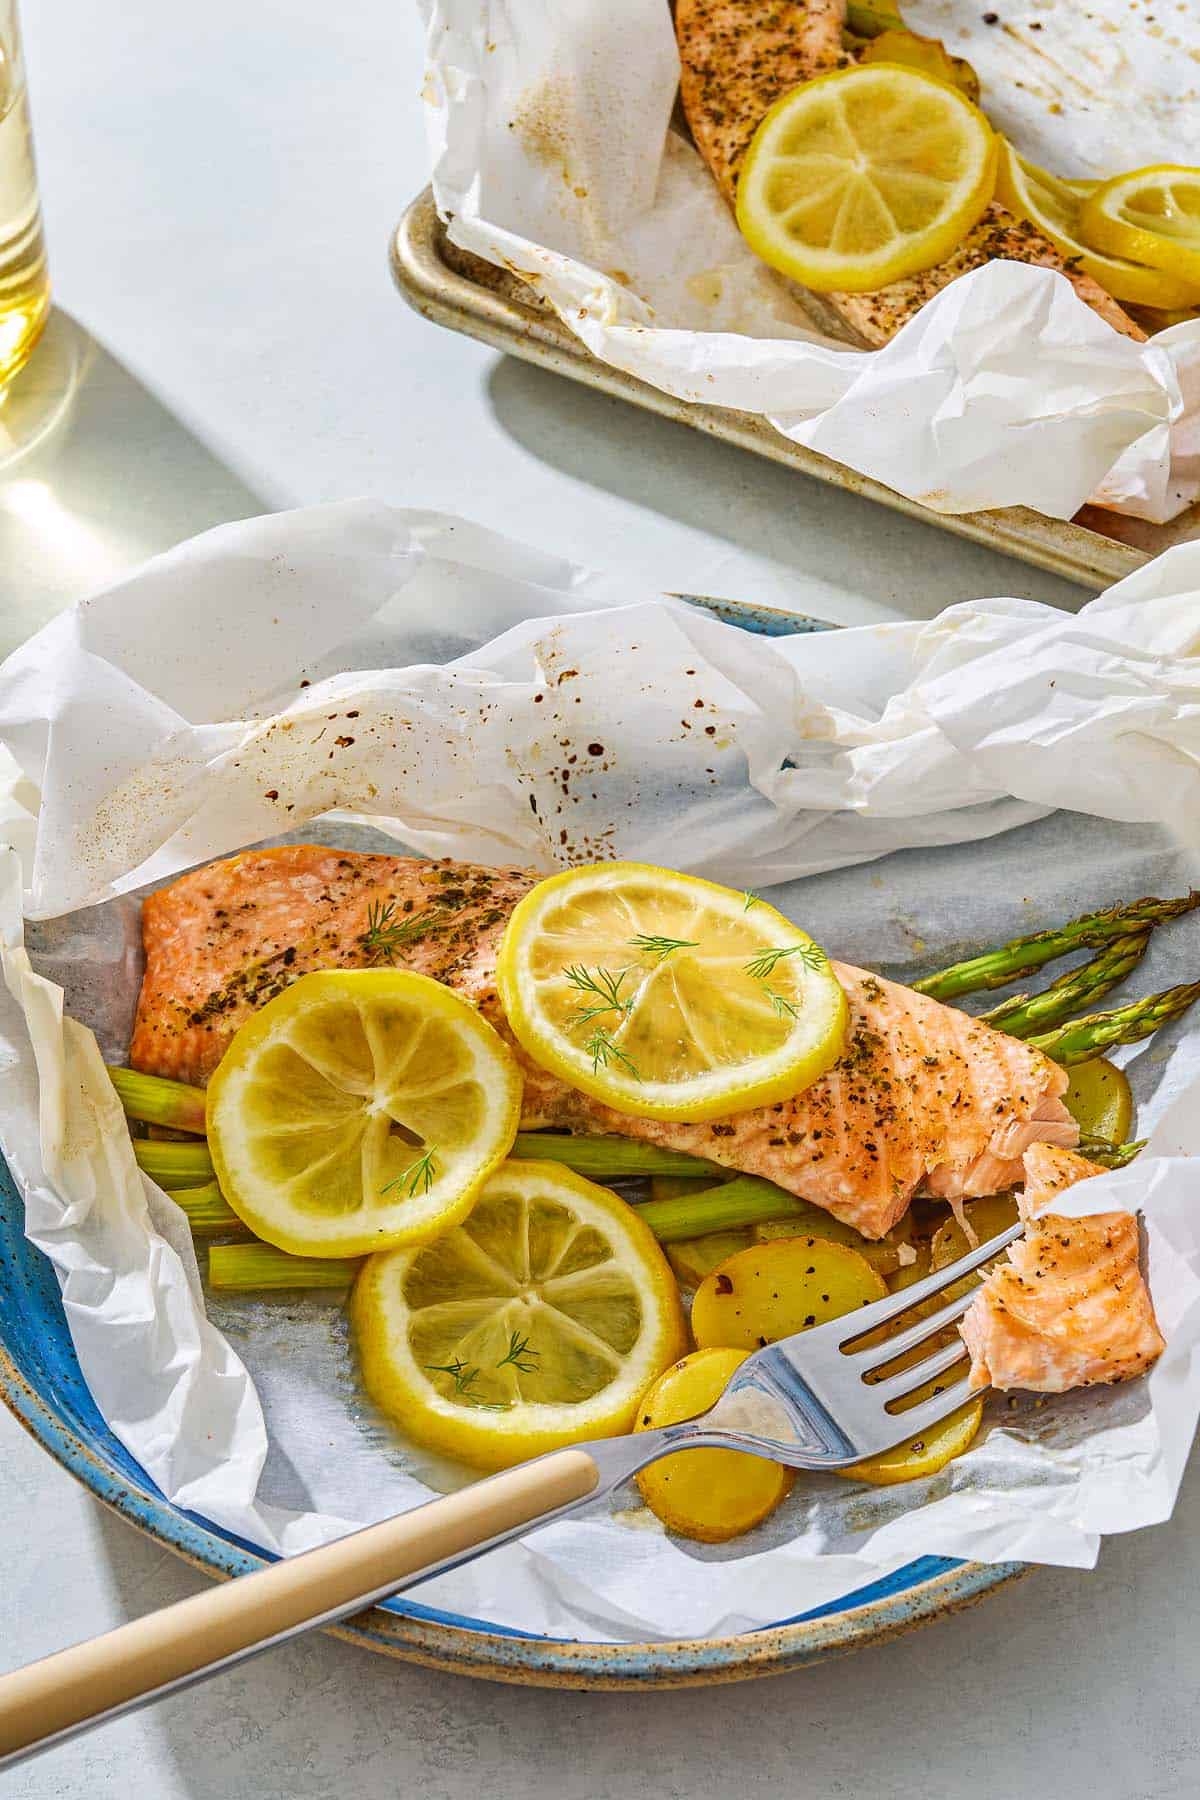 Salmon en papillote topped with lemon wheels on a bed of asparagus and potatoes on a plate with a fork next to the baking sheet with the rest of the salmon.